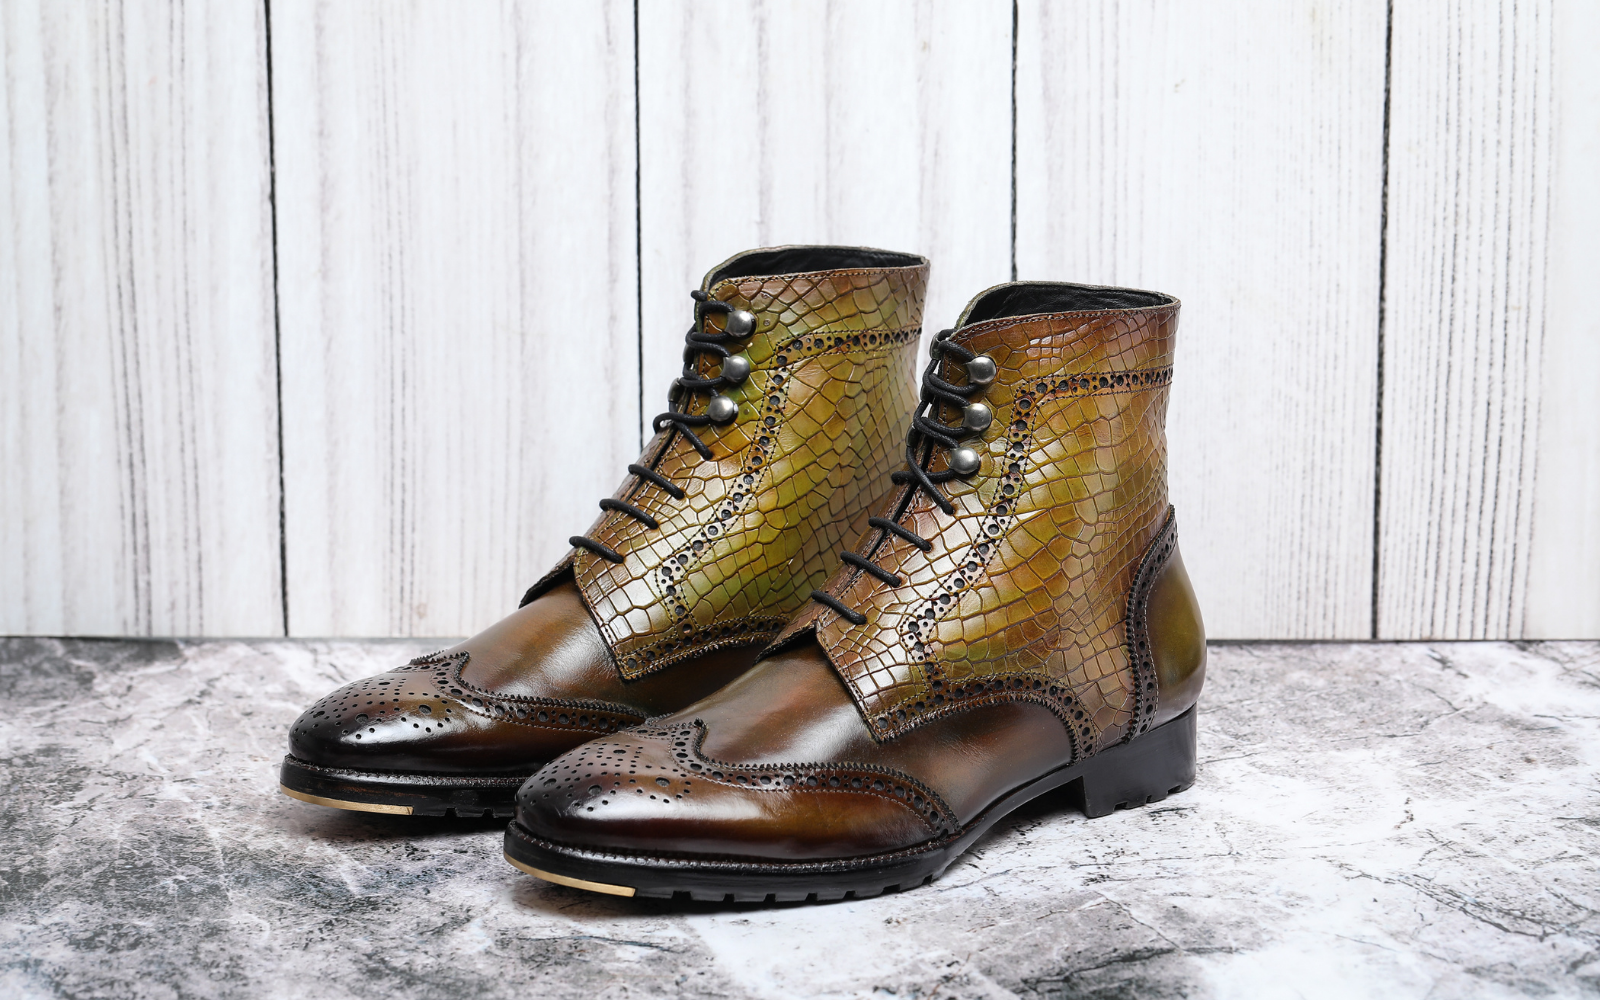 Lethato releasing yet another line of Exceptionally Handcrafted Luxury Boots